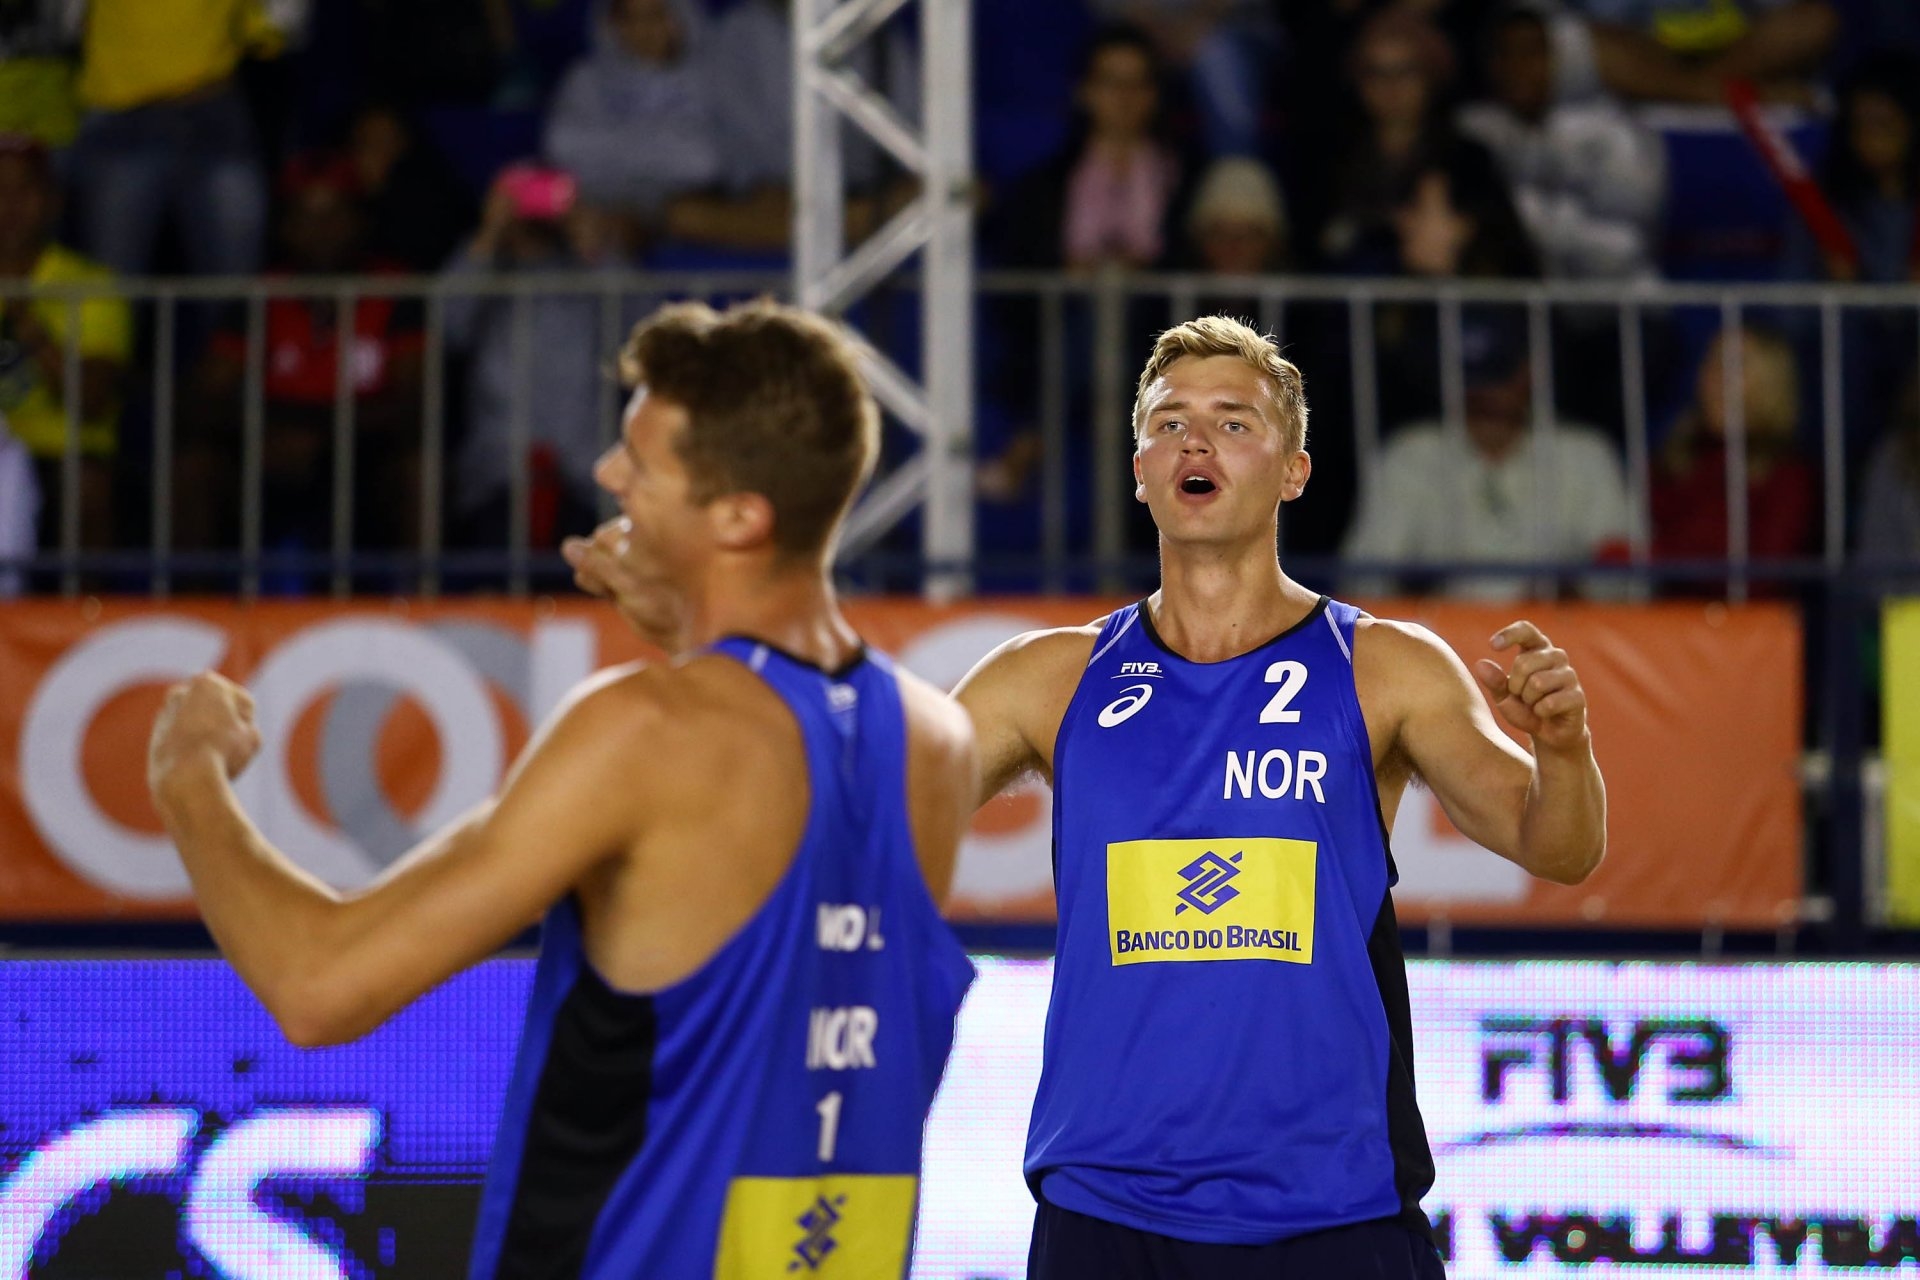 Anders Mol and Christian Sørum won their first medal together in Brazil (Photocredit: FIVB)